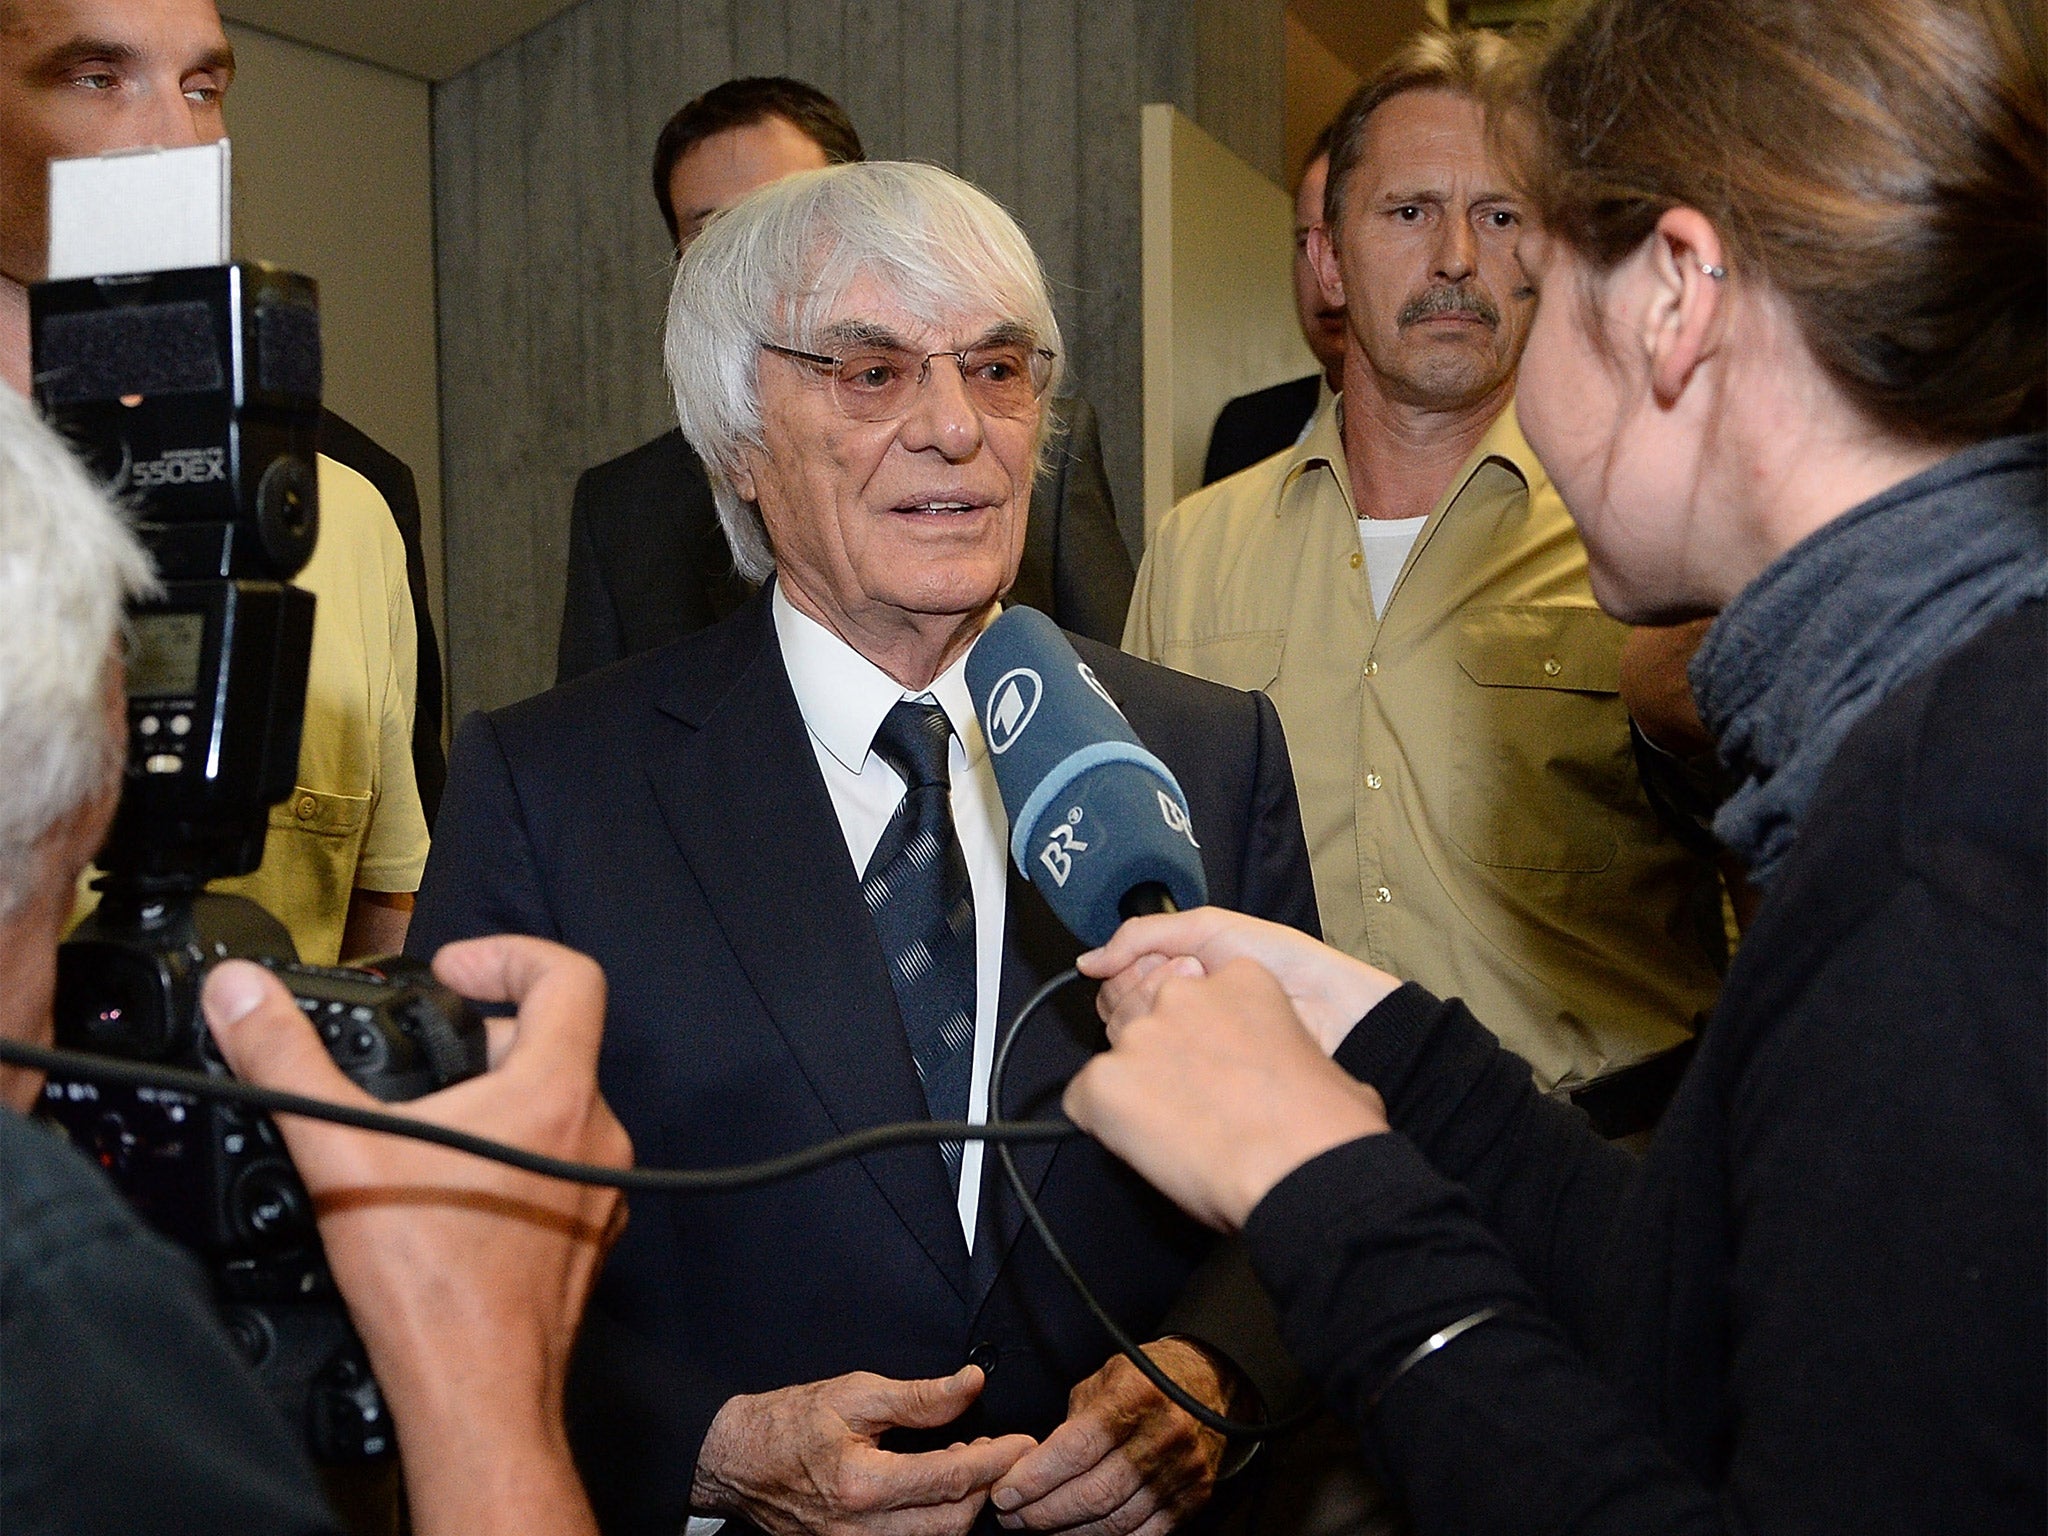 Bernie Ecclestone says he only paid $100m to settle the case because he can afford to pay that sum